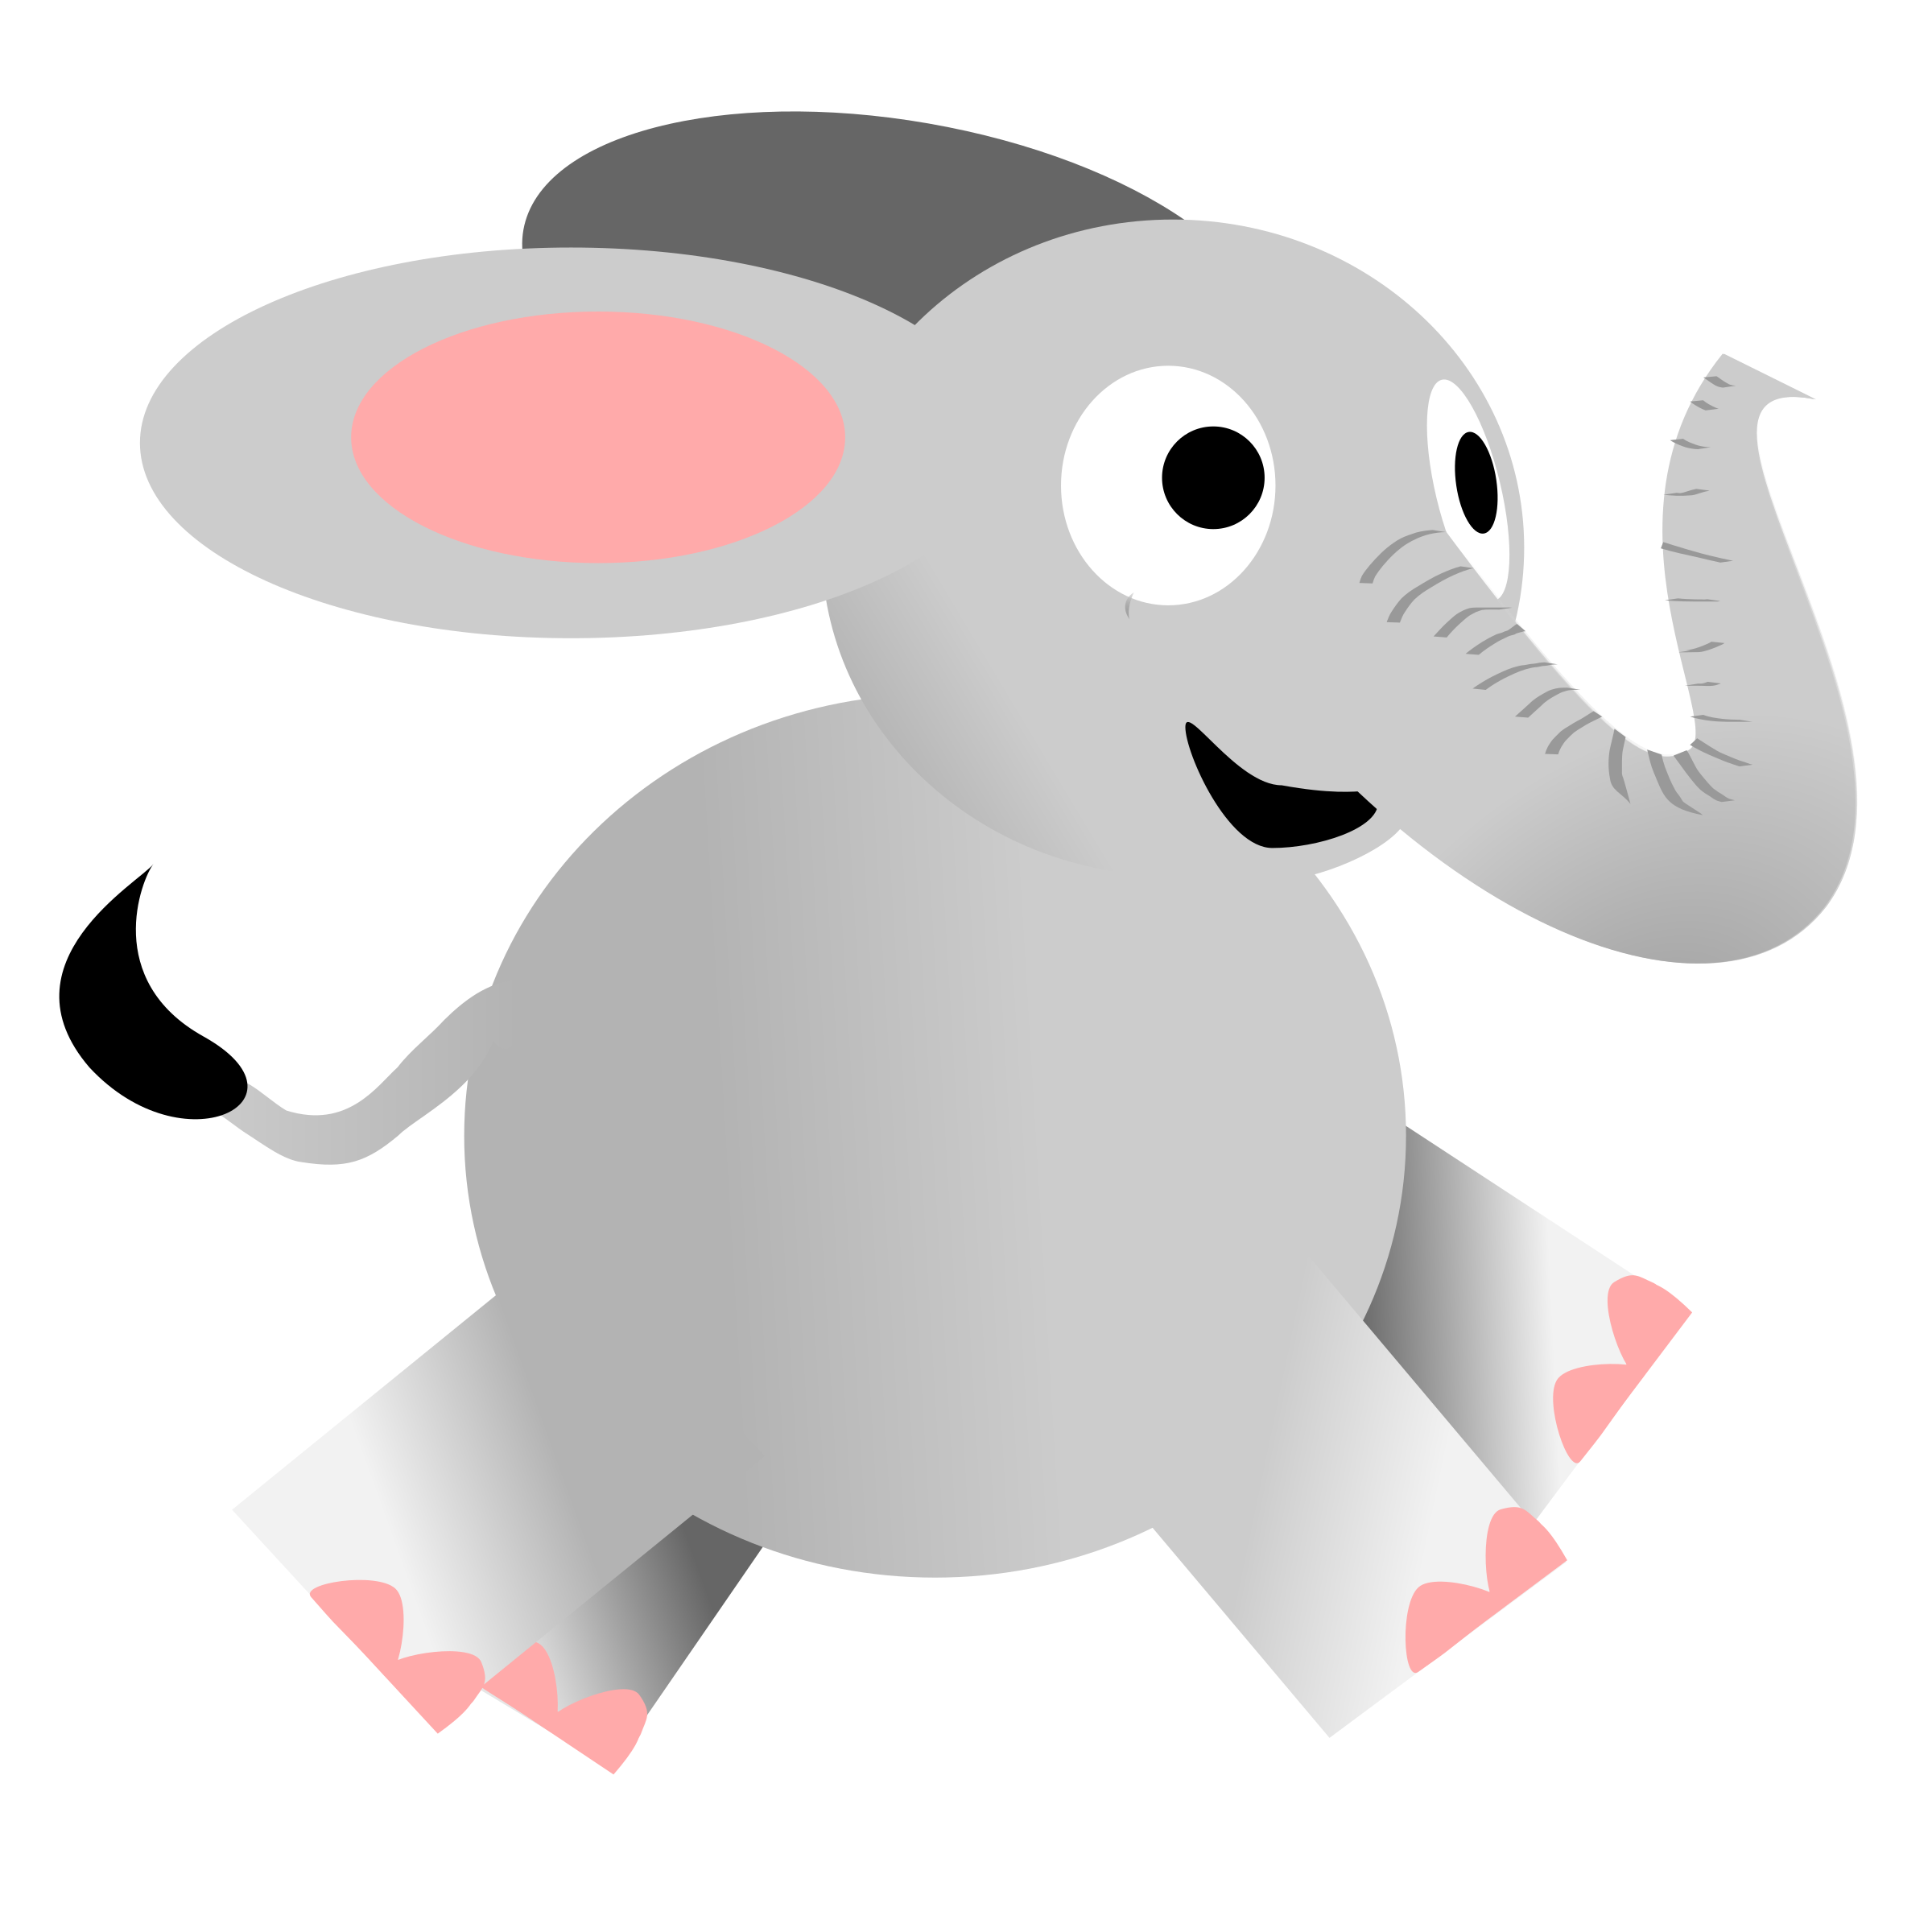 Download Happy running elephant vector clipart image - Free stock photo - Public Domain photo - CC0 Images